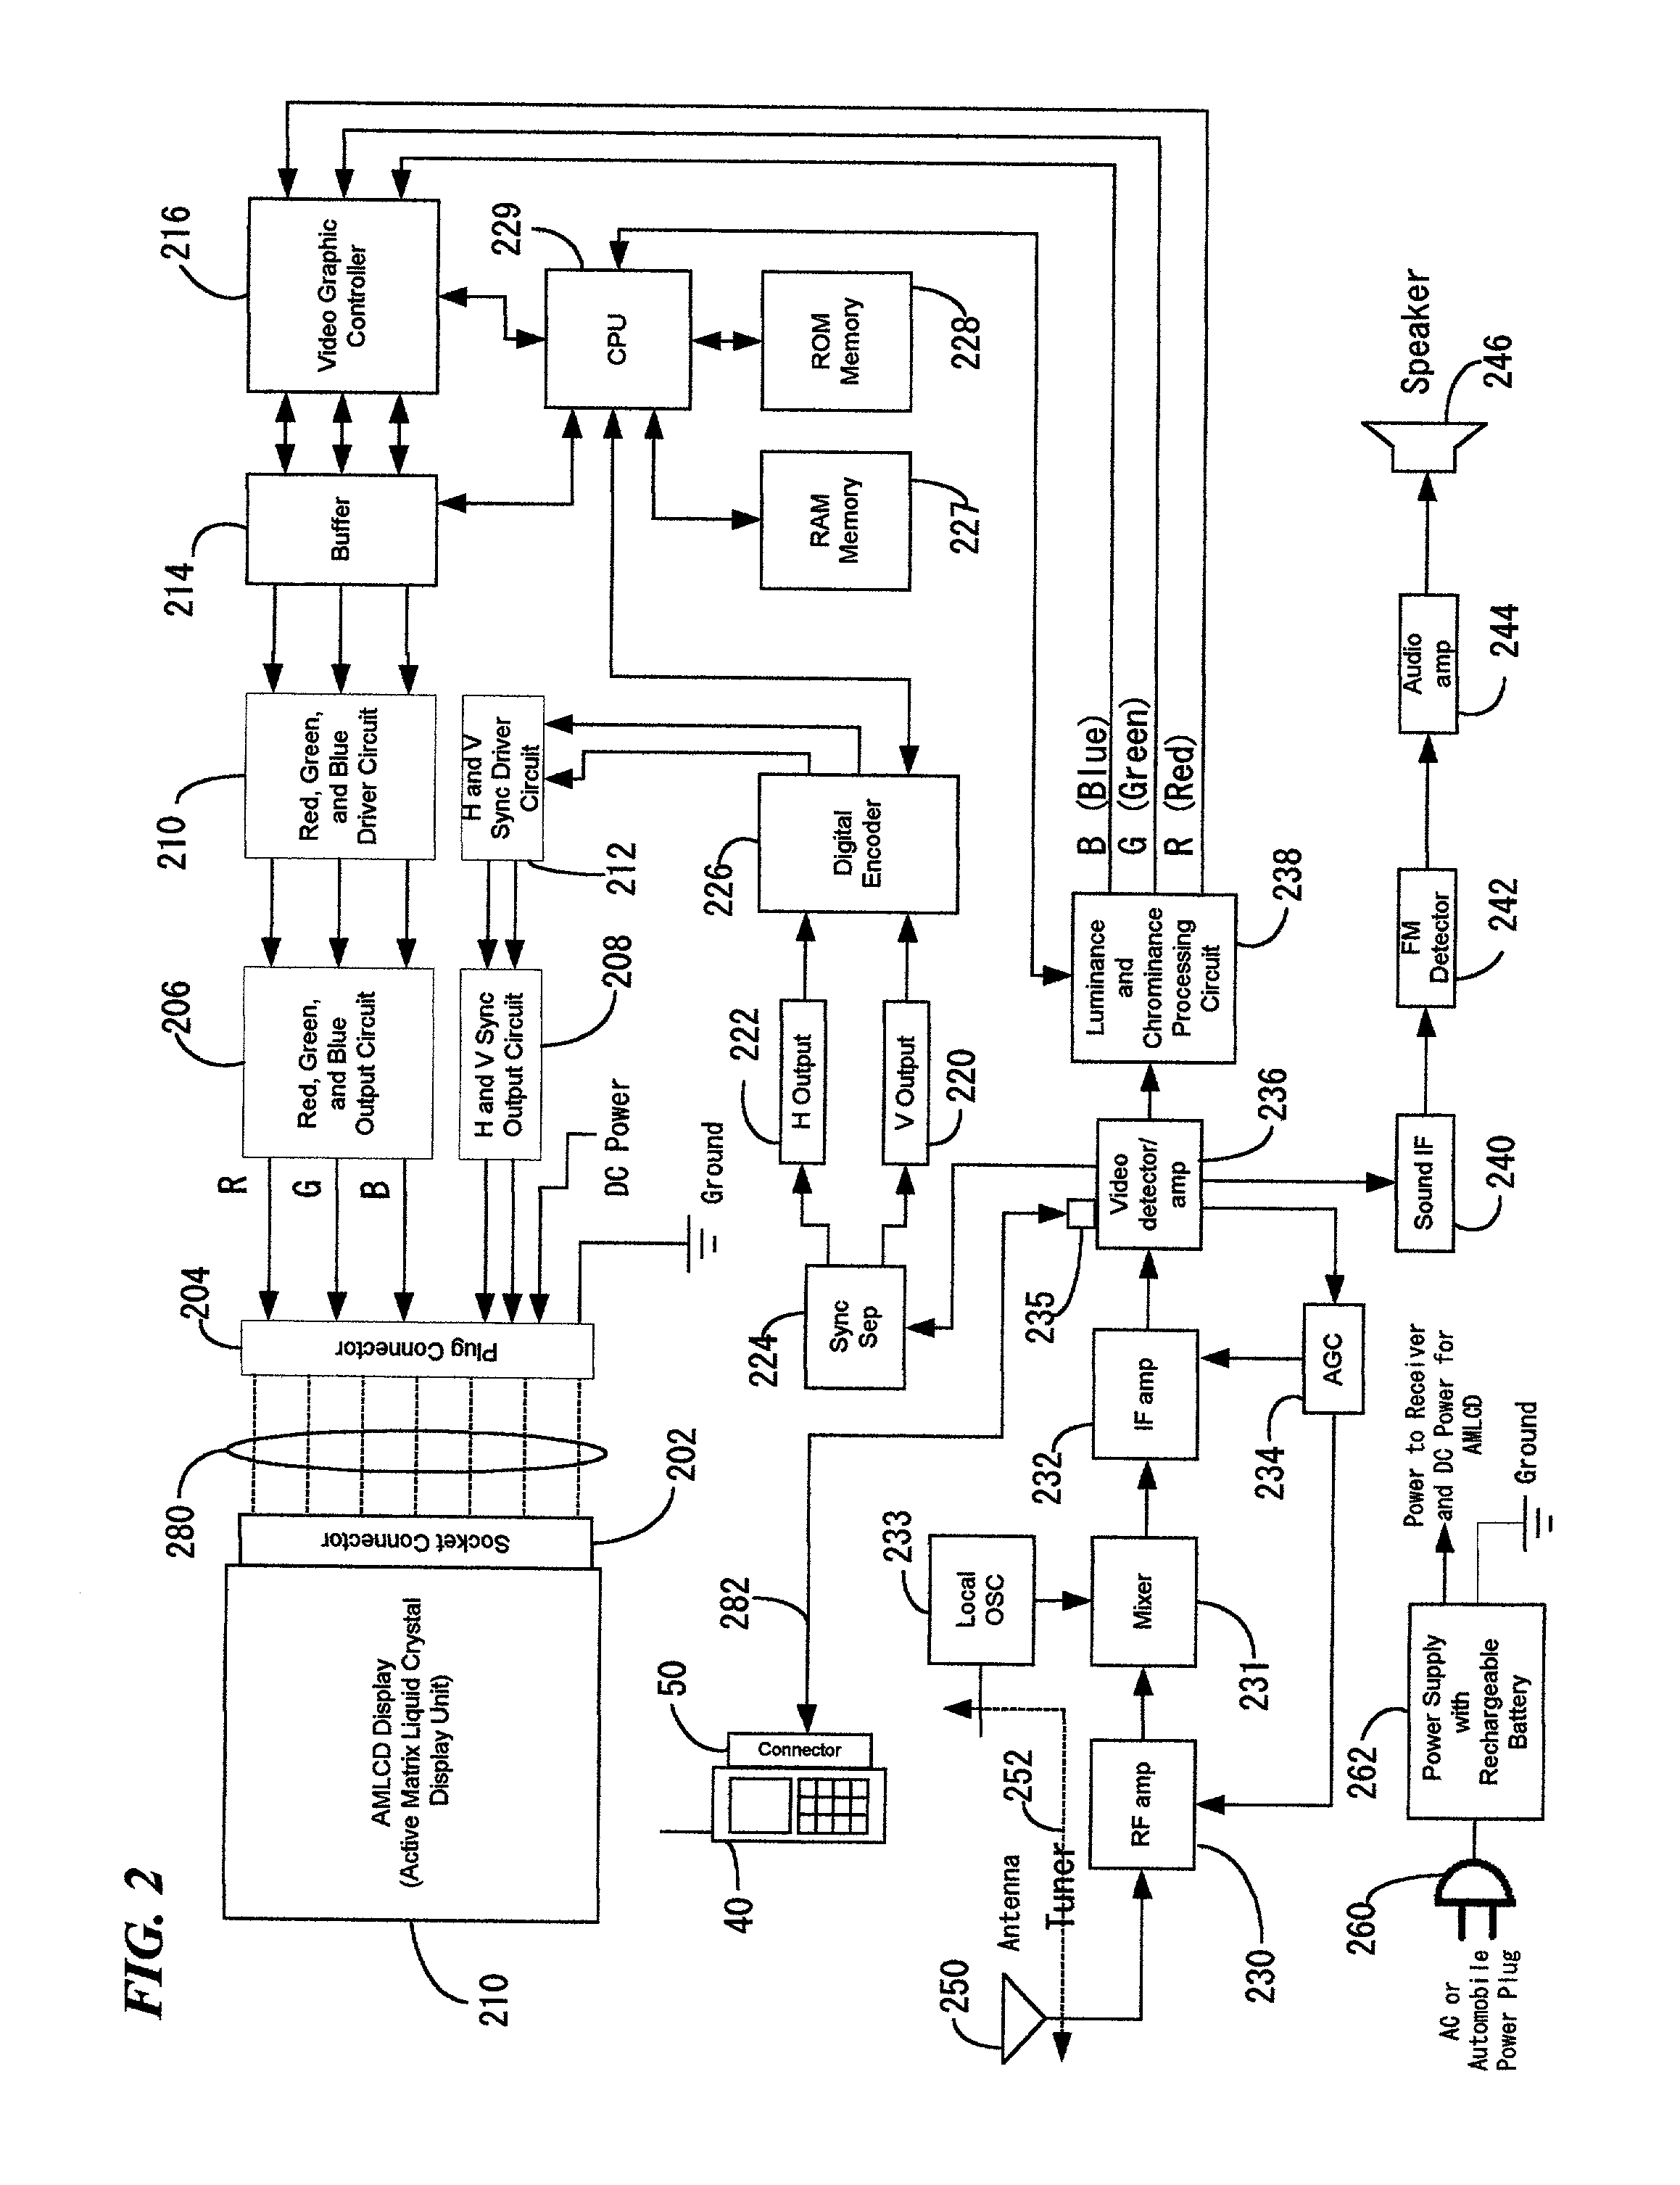 Multimedia display system using display unit of portable computer, and signal receiver for television, radio, and wireless telephone